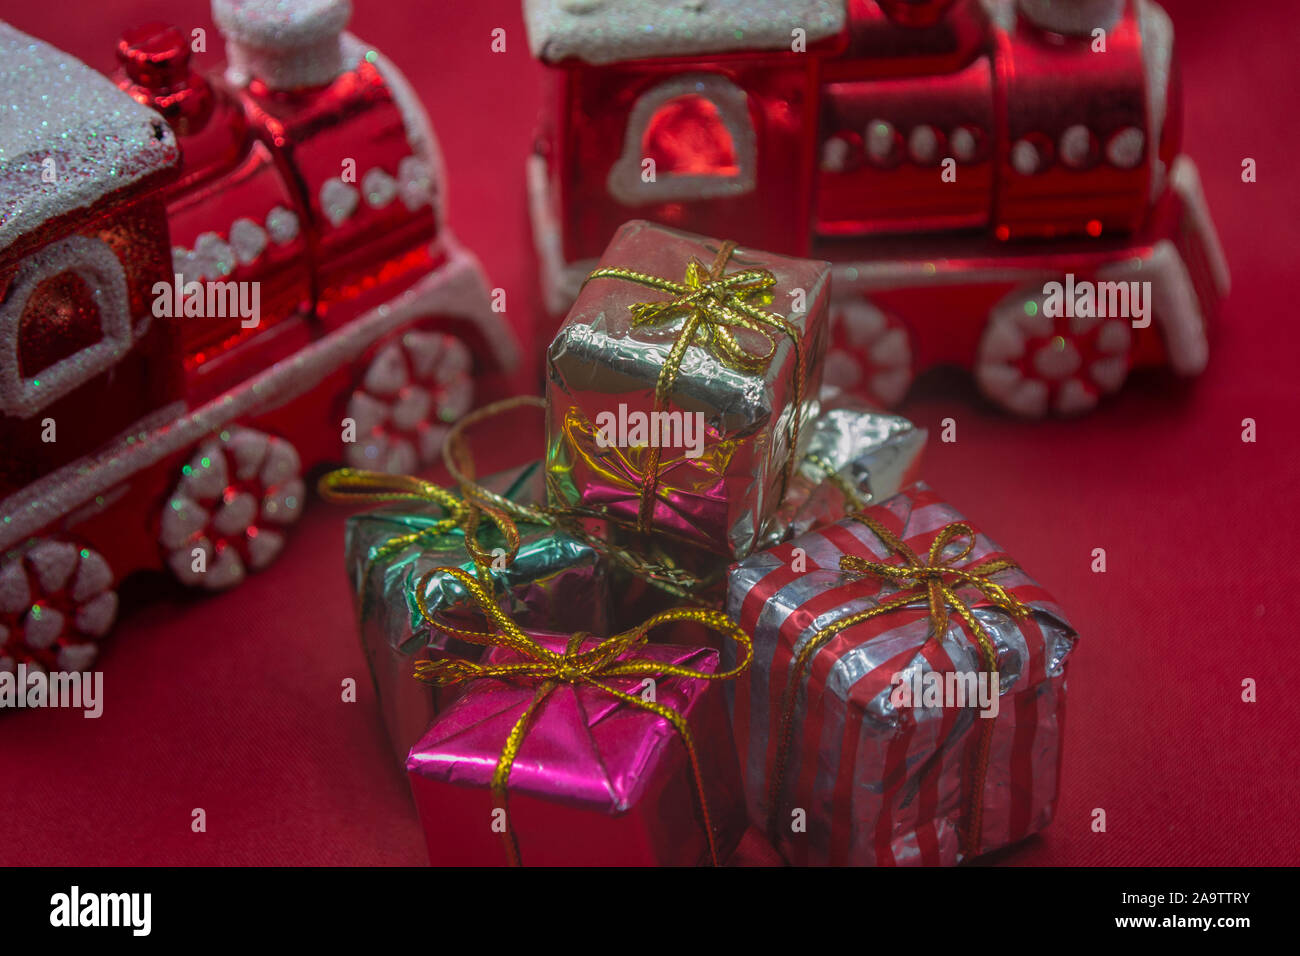 Red train ornaments with Christmas gifts on red background, photo-illustration Stock Photo